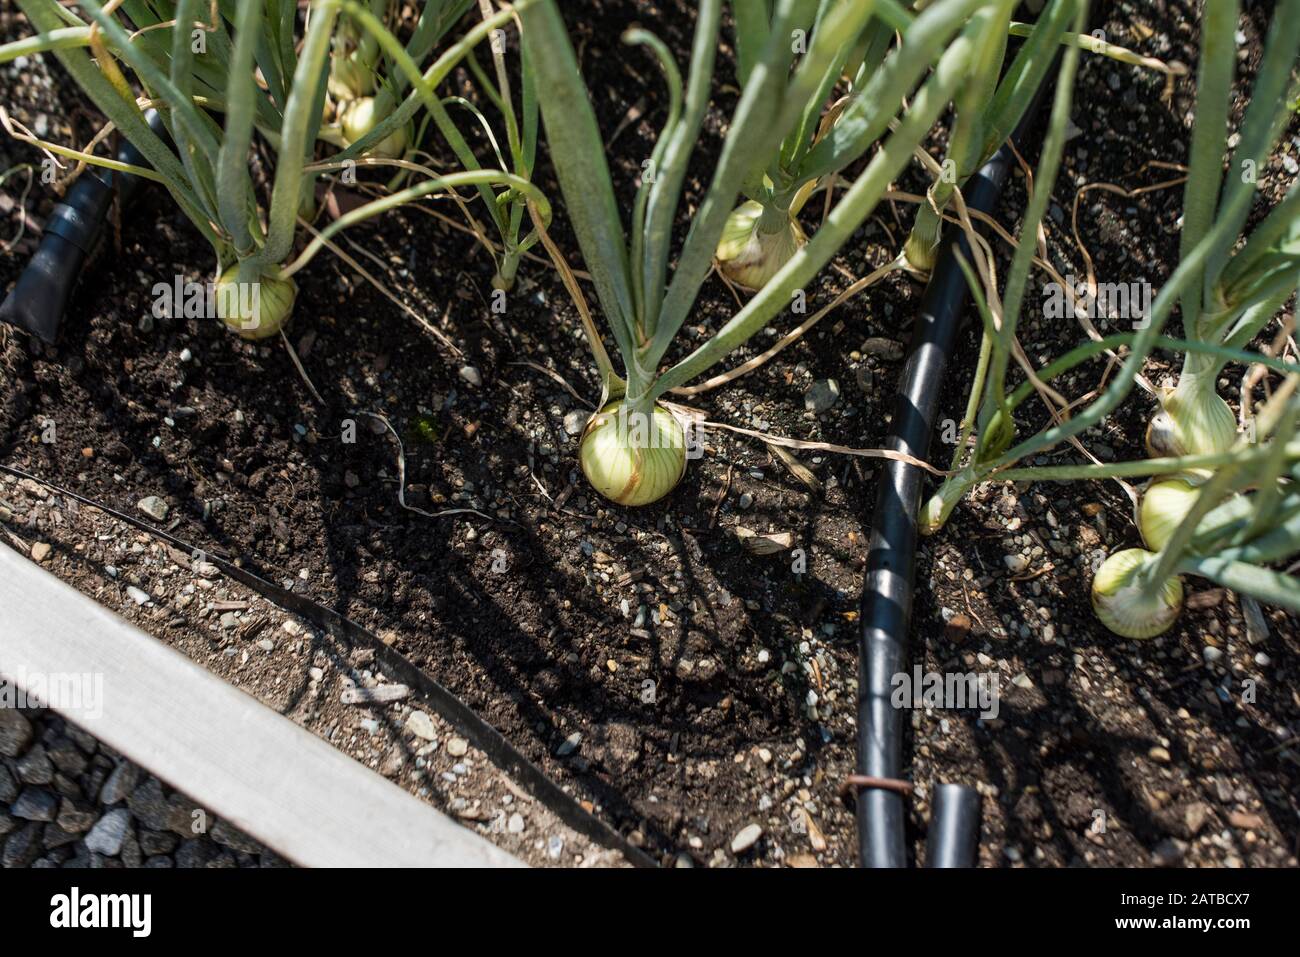 Onions growing in urban garden raised bed Stock Photo